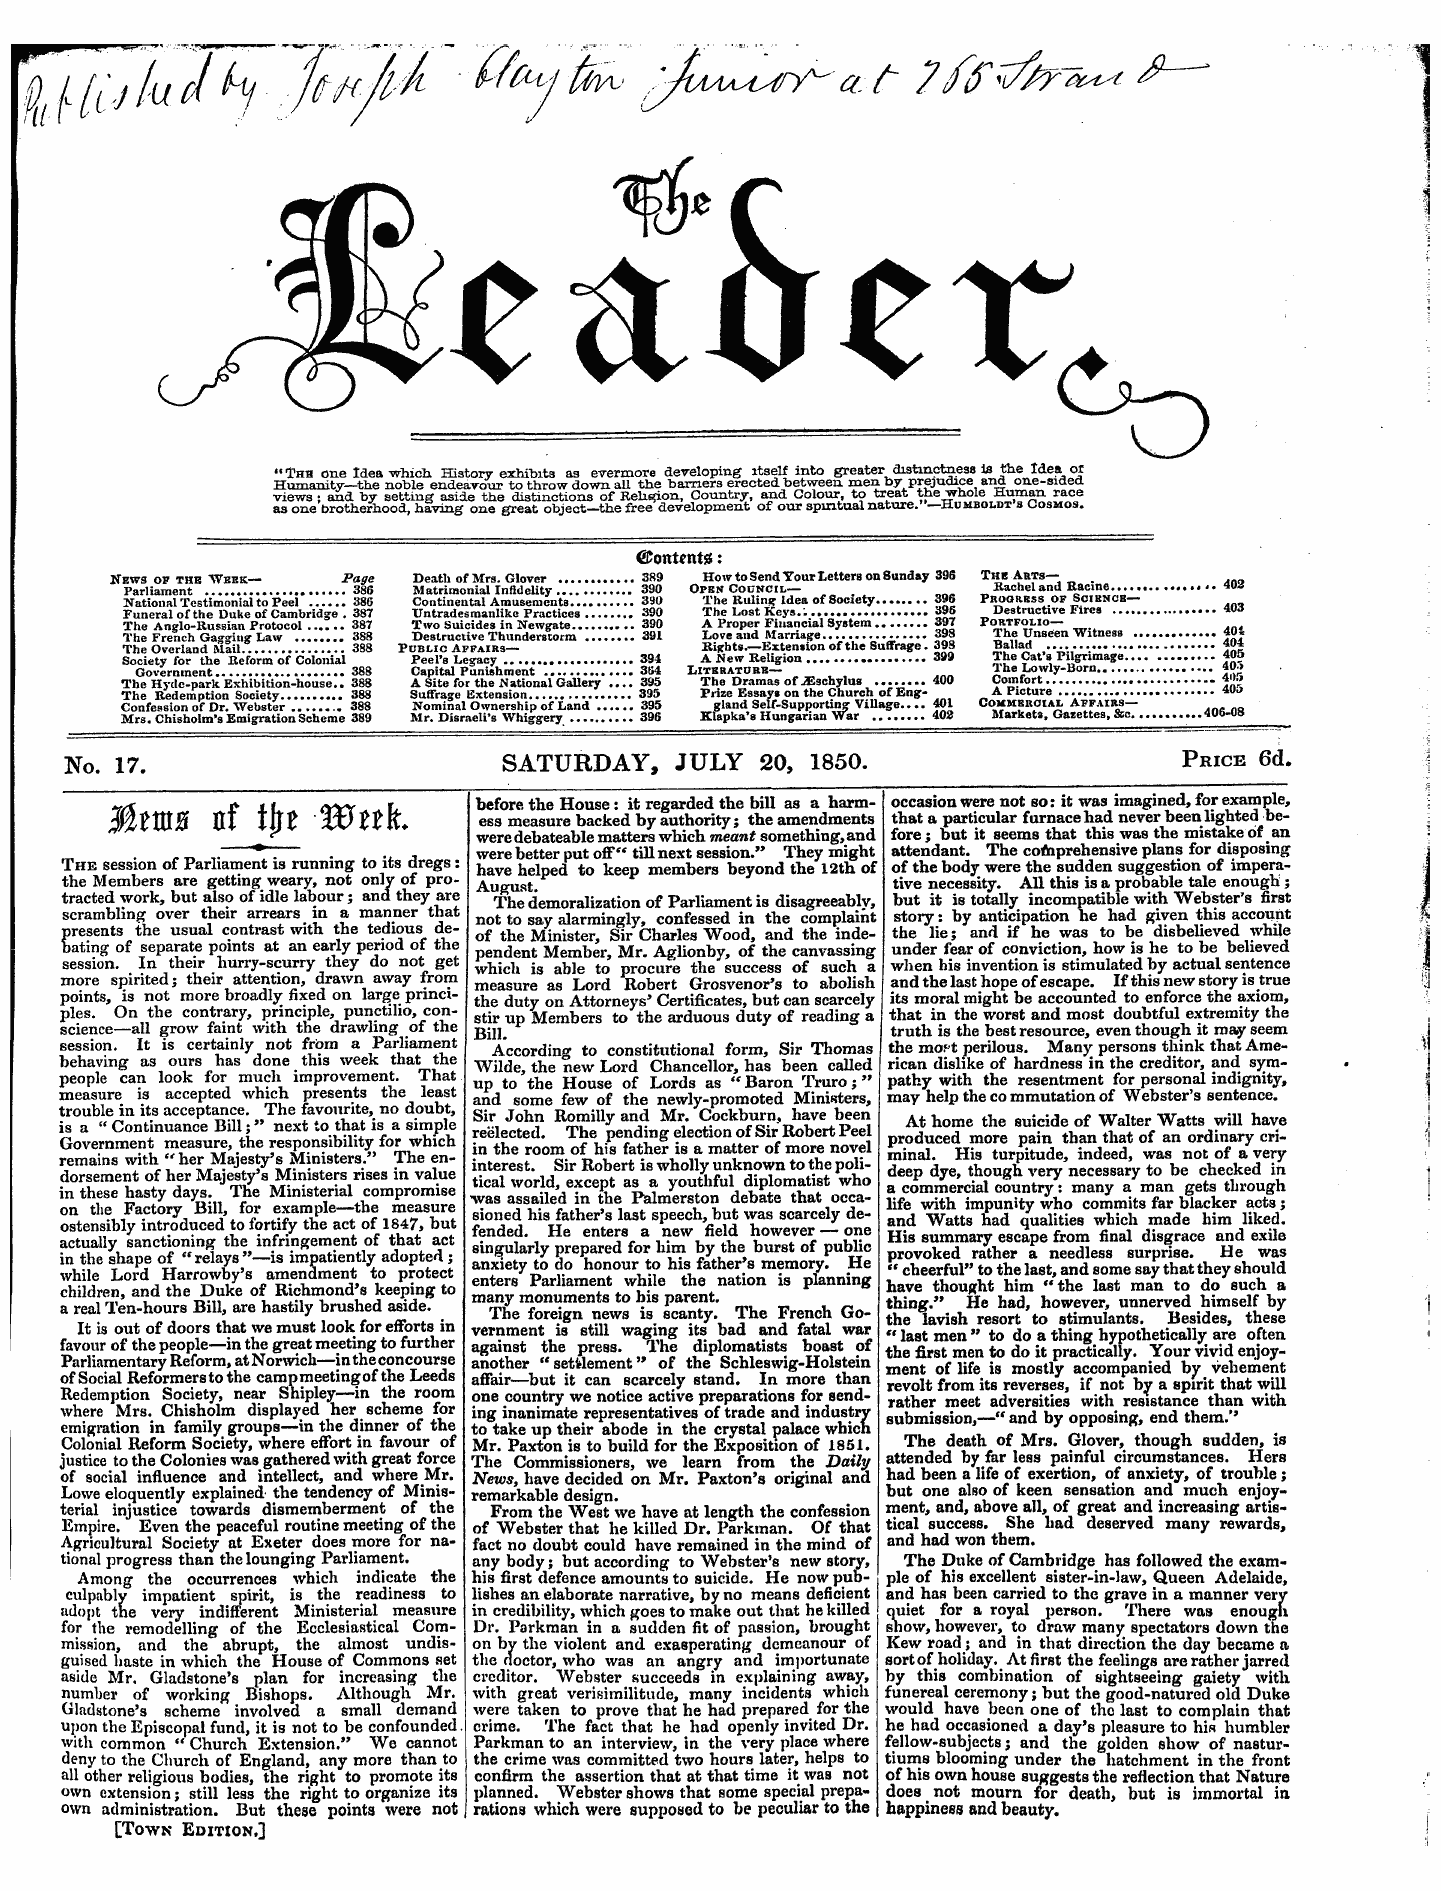 Leader (1850-1860): jS F Y, Town edition - Mtms N In Wnk